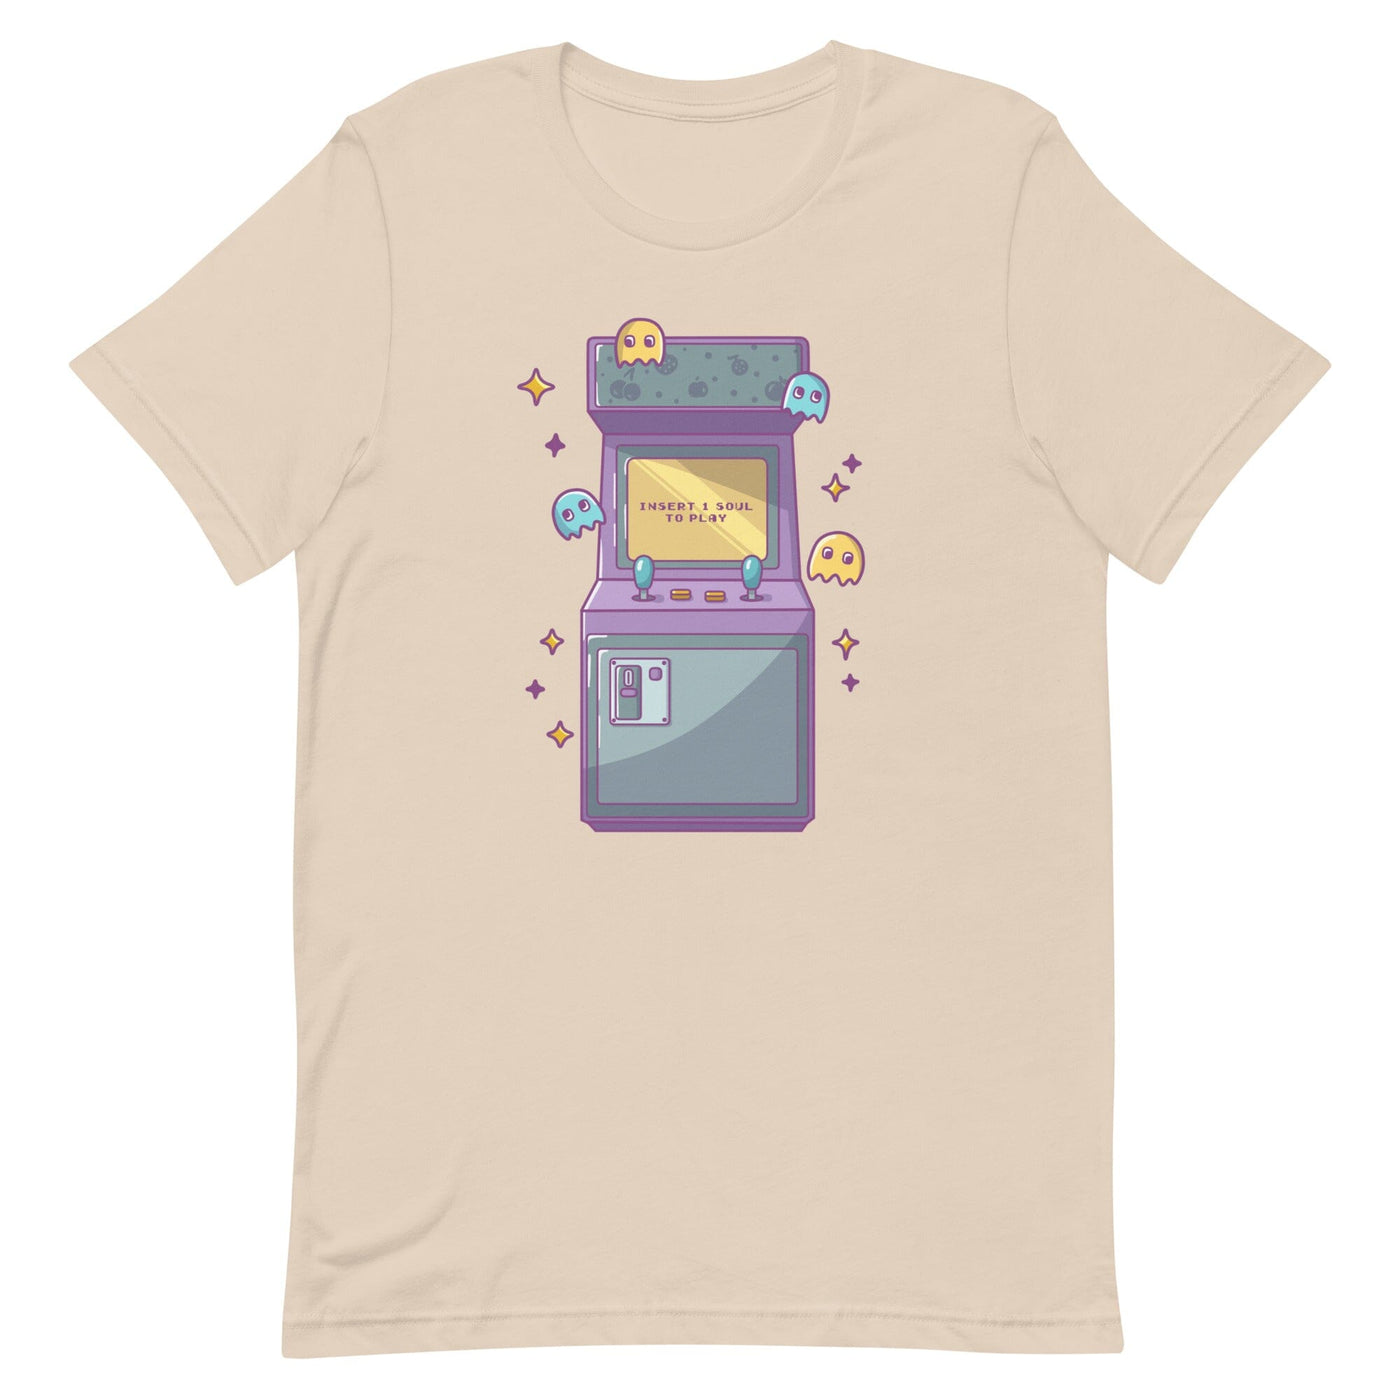 Insert 1 Soul to Play | Unisex t-shirt | Retro Gaming Threads & Thistles Inventory Soft Cream XS 